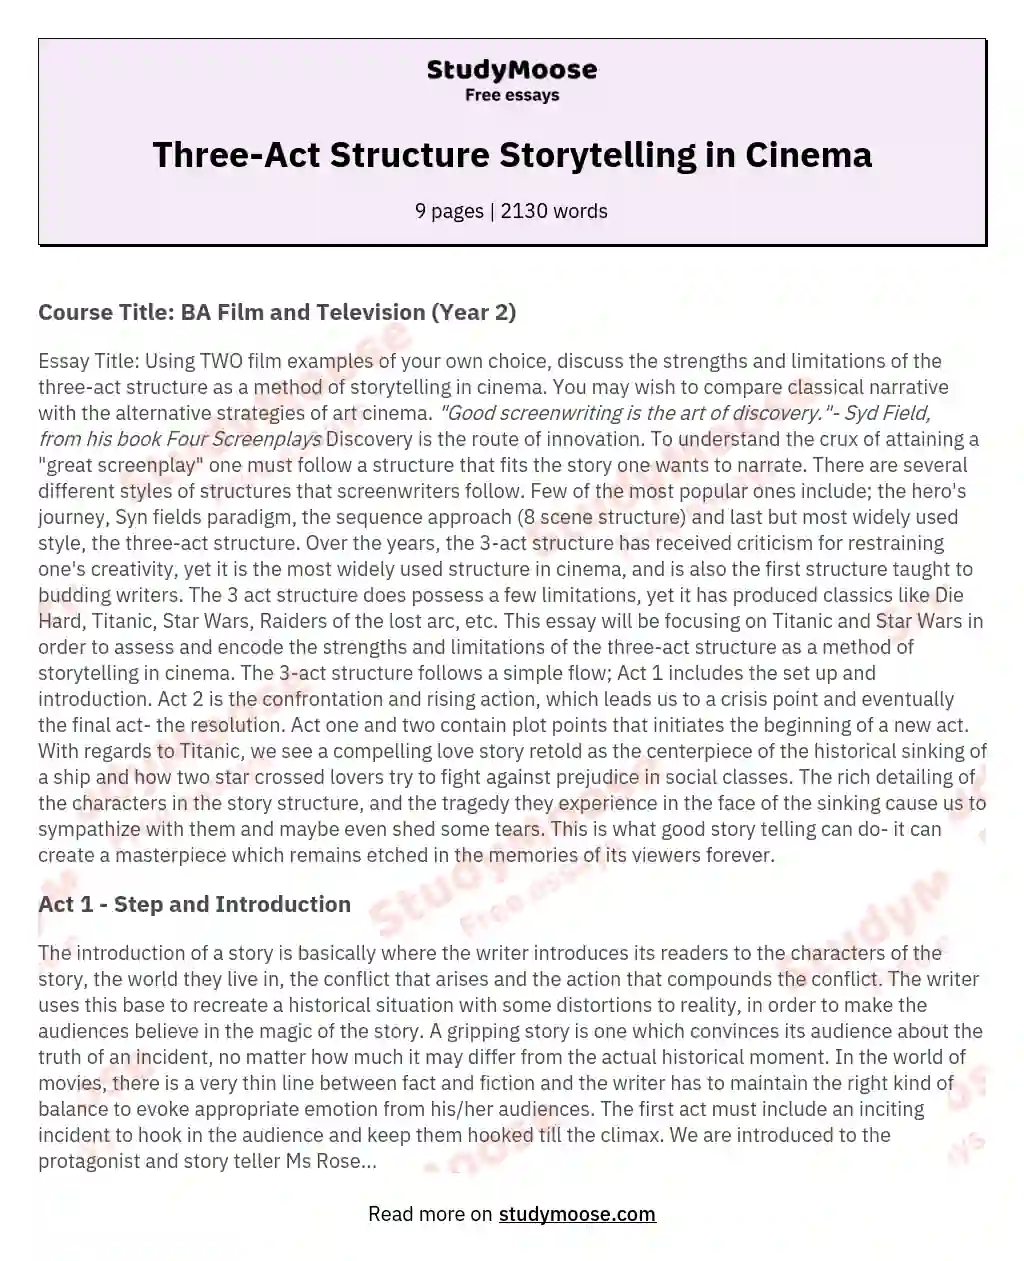 Three-Act Structure Storytelling in Cinema essay